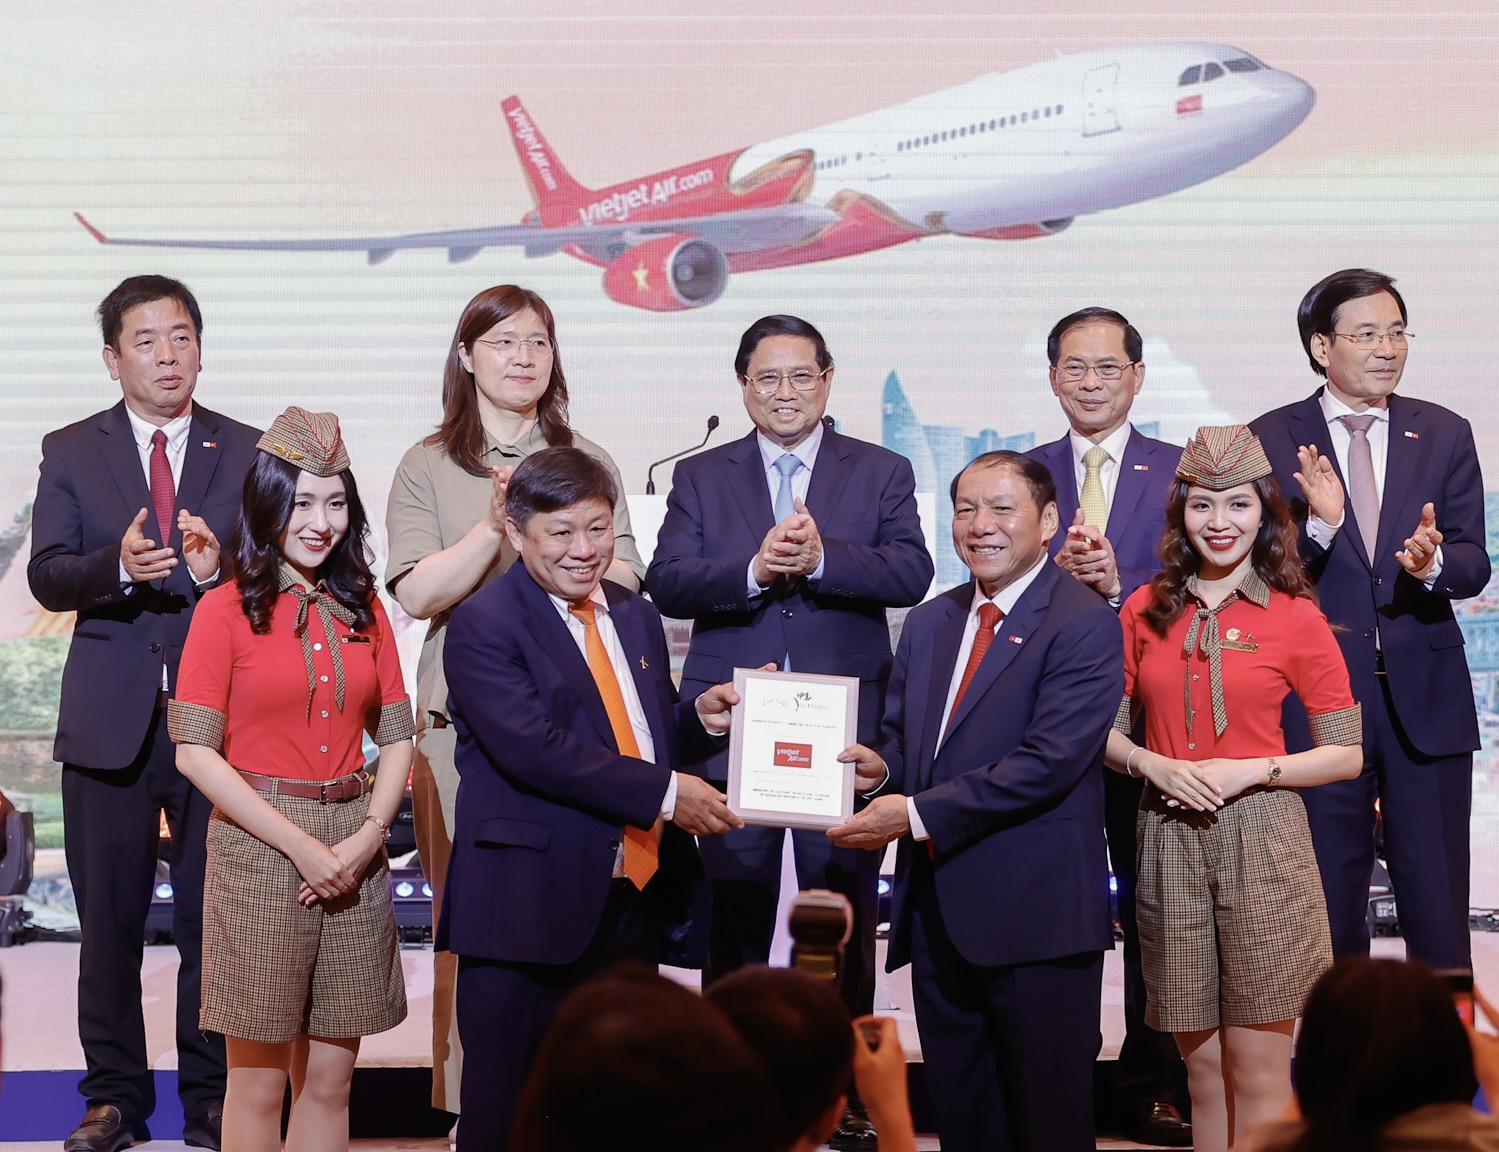 Vietjet's_10th_Anniversary_of_Air_Connectivity_between_Vietnam_and